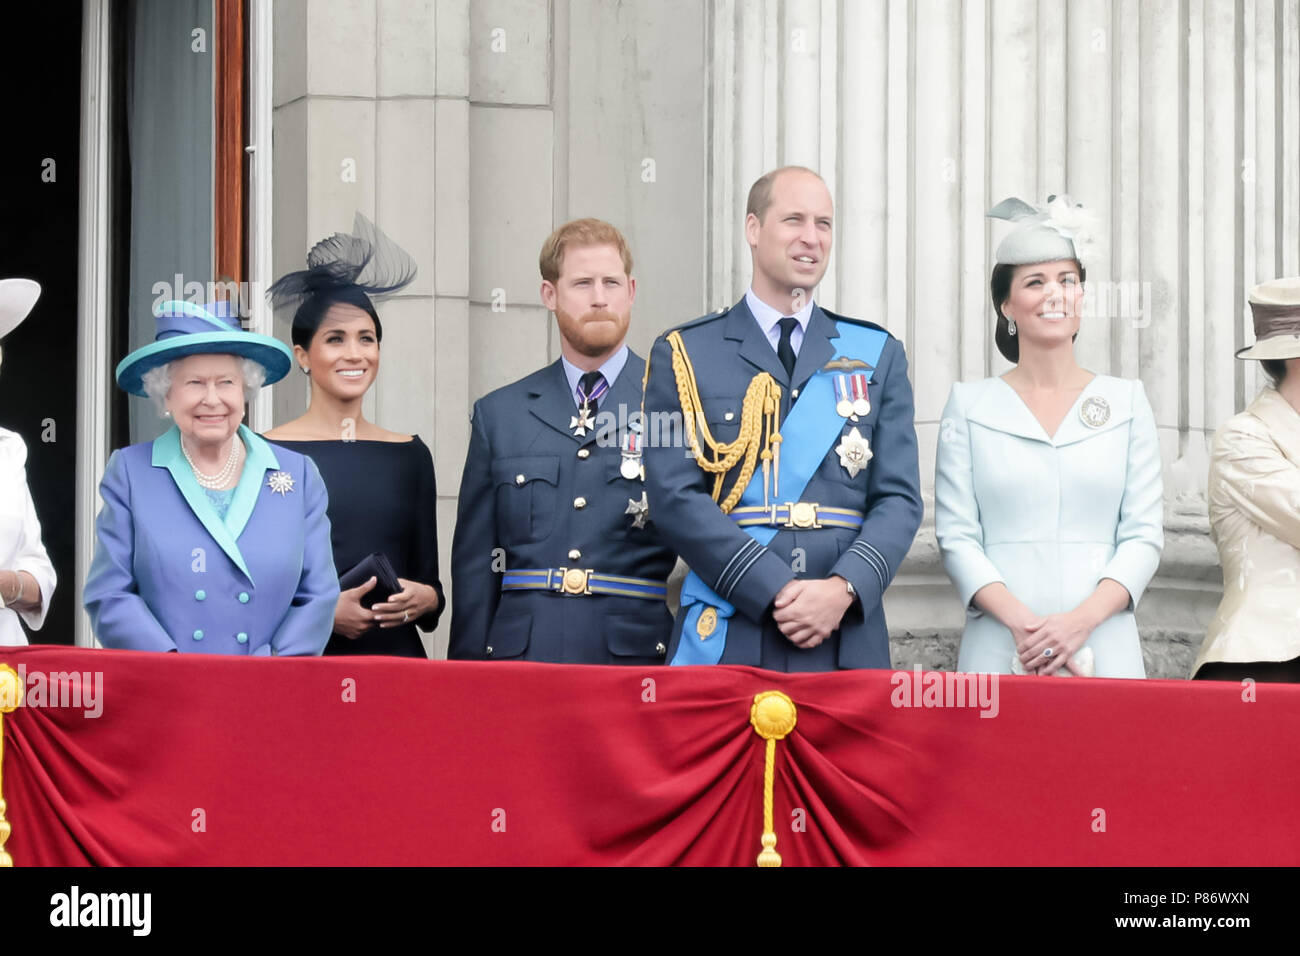 London, UK. 10th July 2018. Her Majesty The Queen, TRH the Duke and Duchess of Sussex and TRH the Duke and Duchess of Cambridge watching the flypast from Buckingham Palace Balcony to commemorate 100 years of the RAF. Credit: amanda rose/Alamy Live News Stock Photo